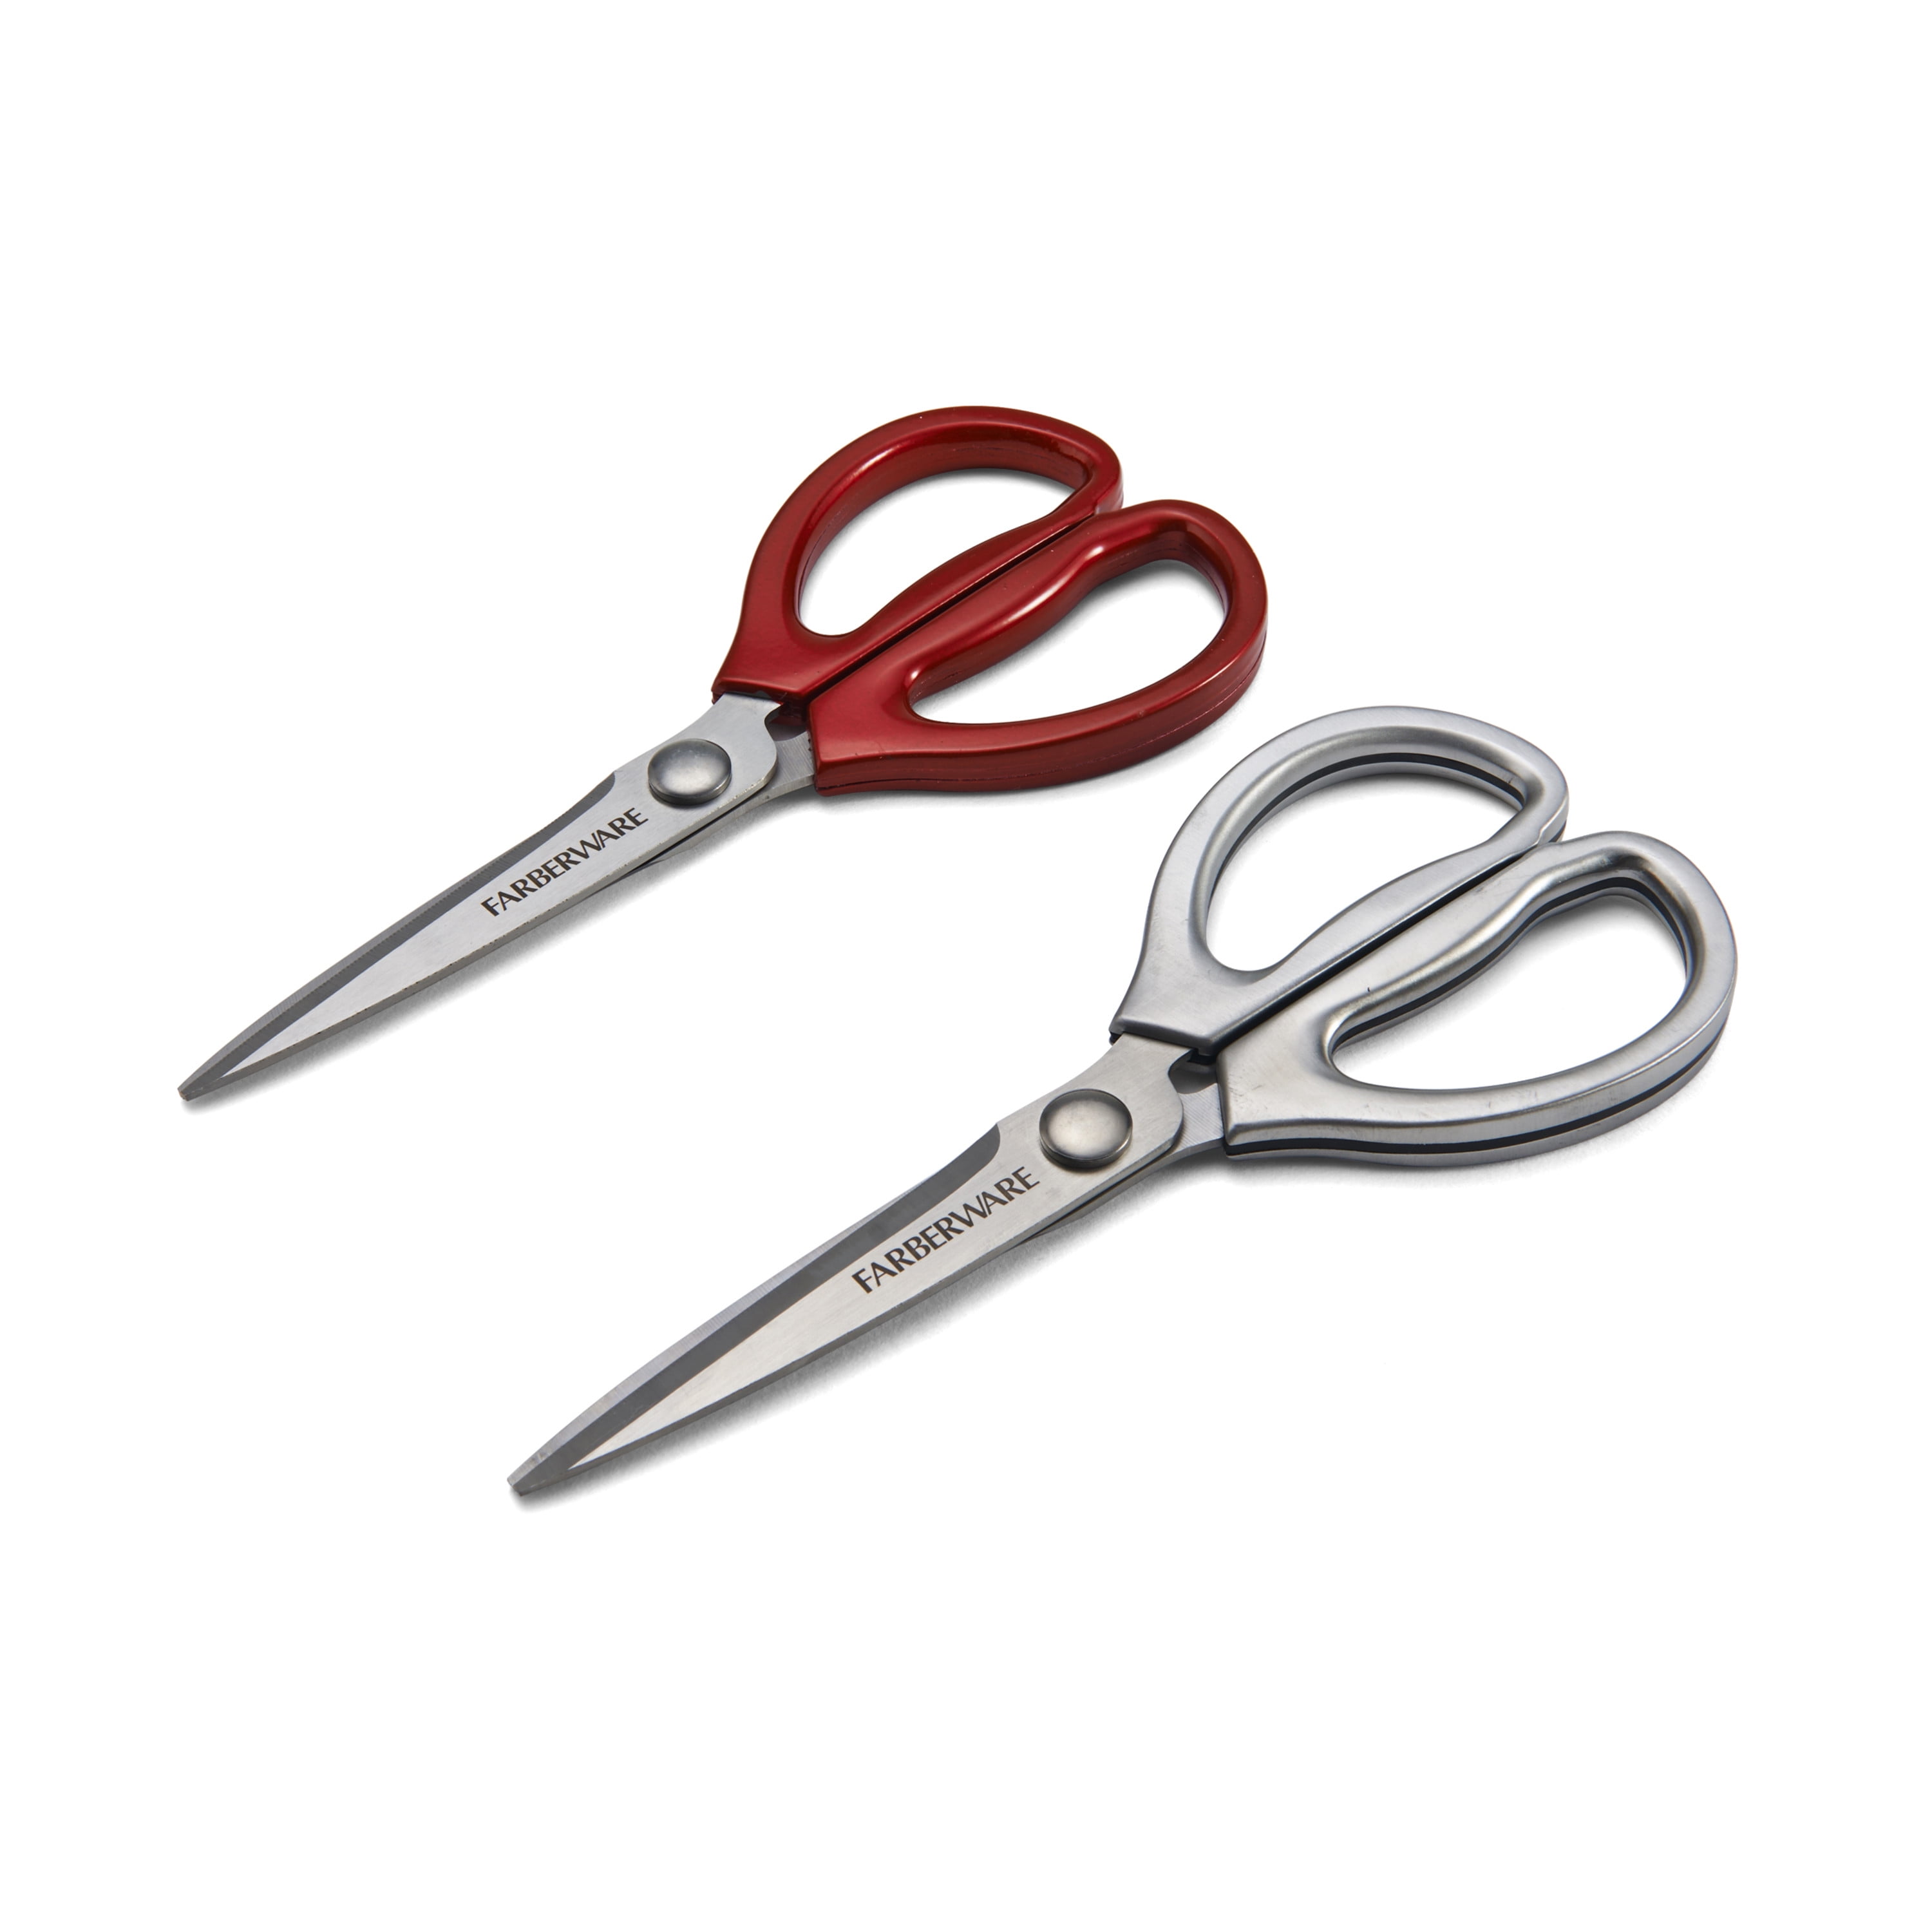 Farberware 5216106 Professional Stainless Steel All-Purpose Kitchen Shears Red